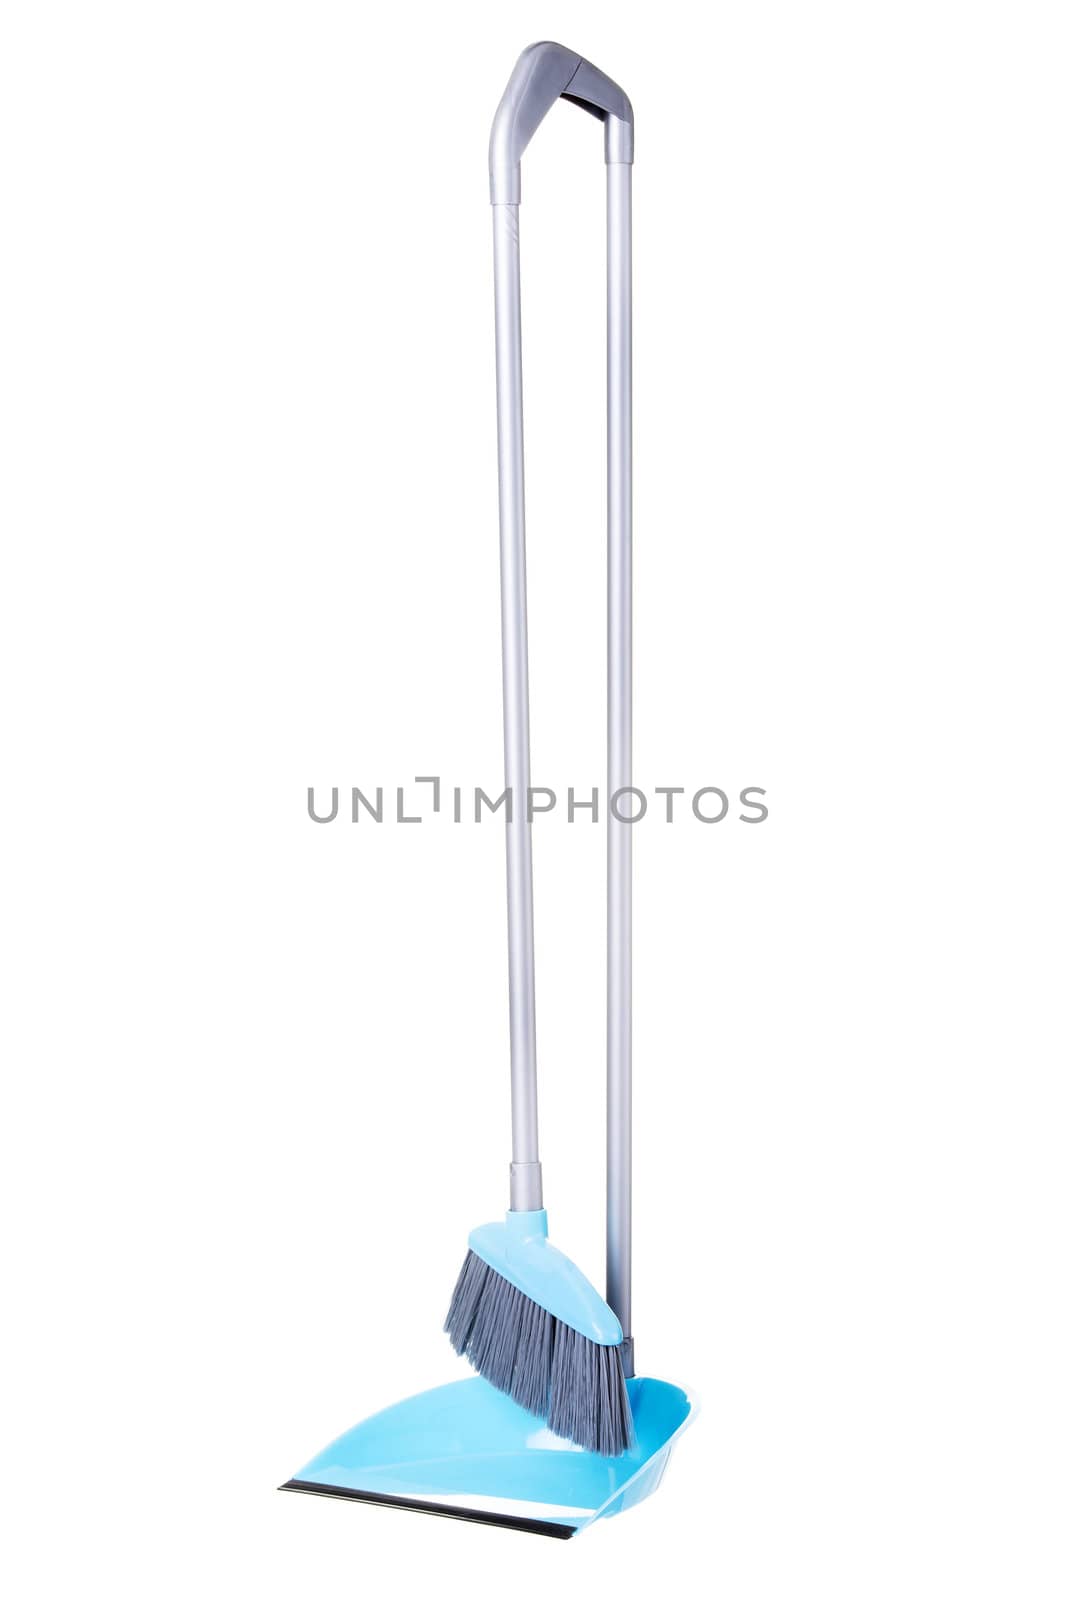 Blue broom and scoop isolated on white